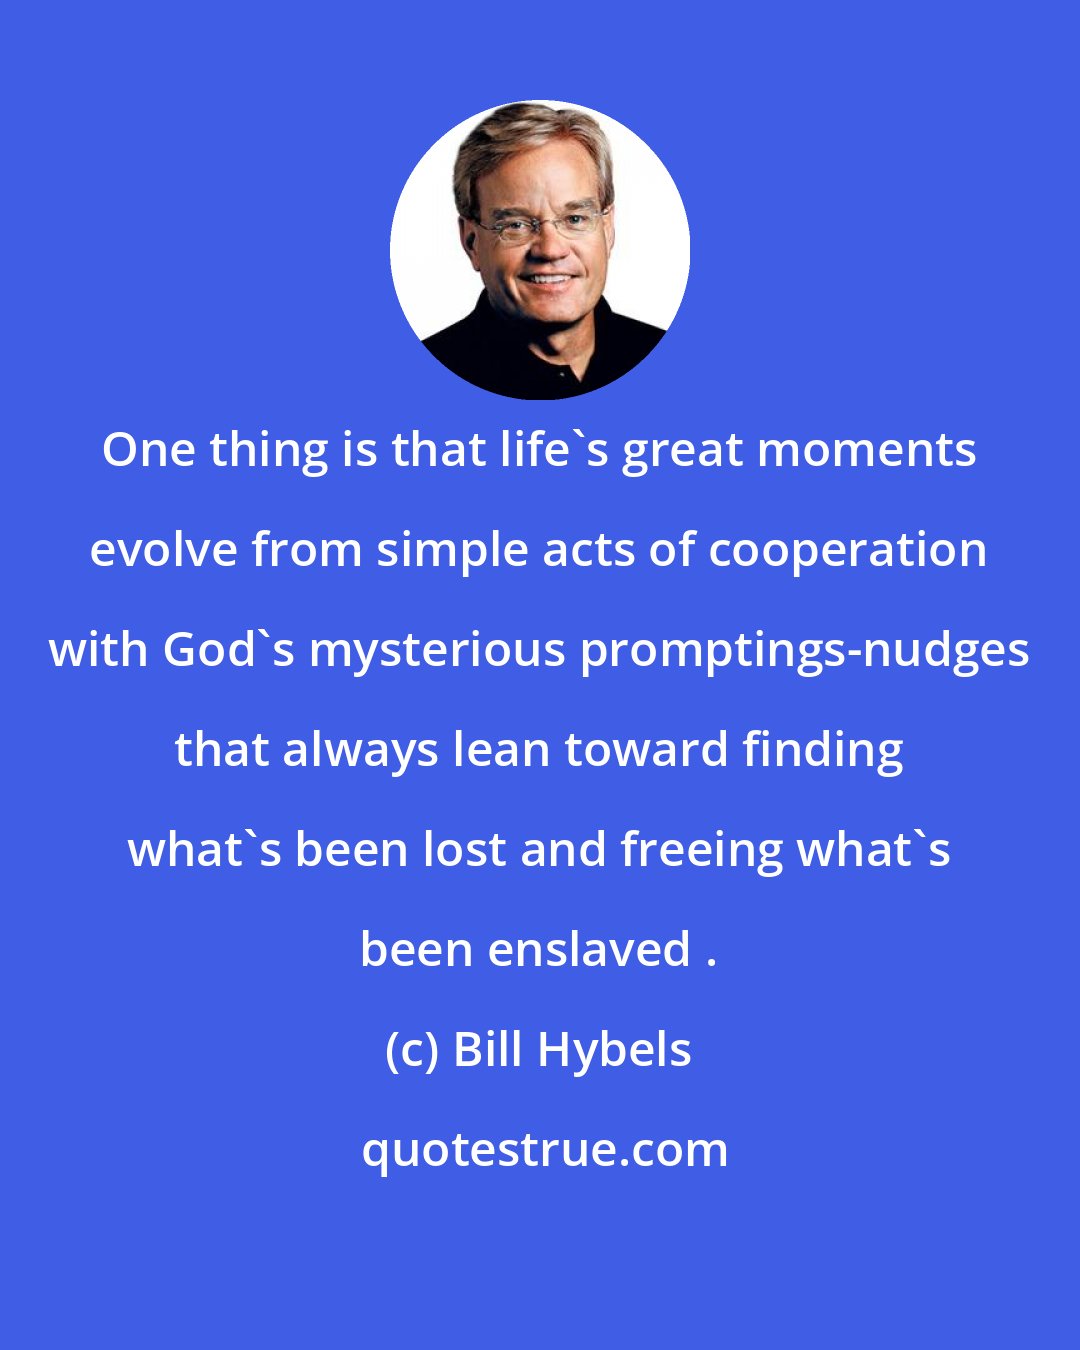 Bill Hybels: One thing is that life's great moments evolve from simple acts of cooperation with God's mysterious promptings-nudges that always lean toward finding what's been lost and freeing what's been enslaved .